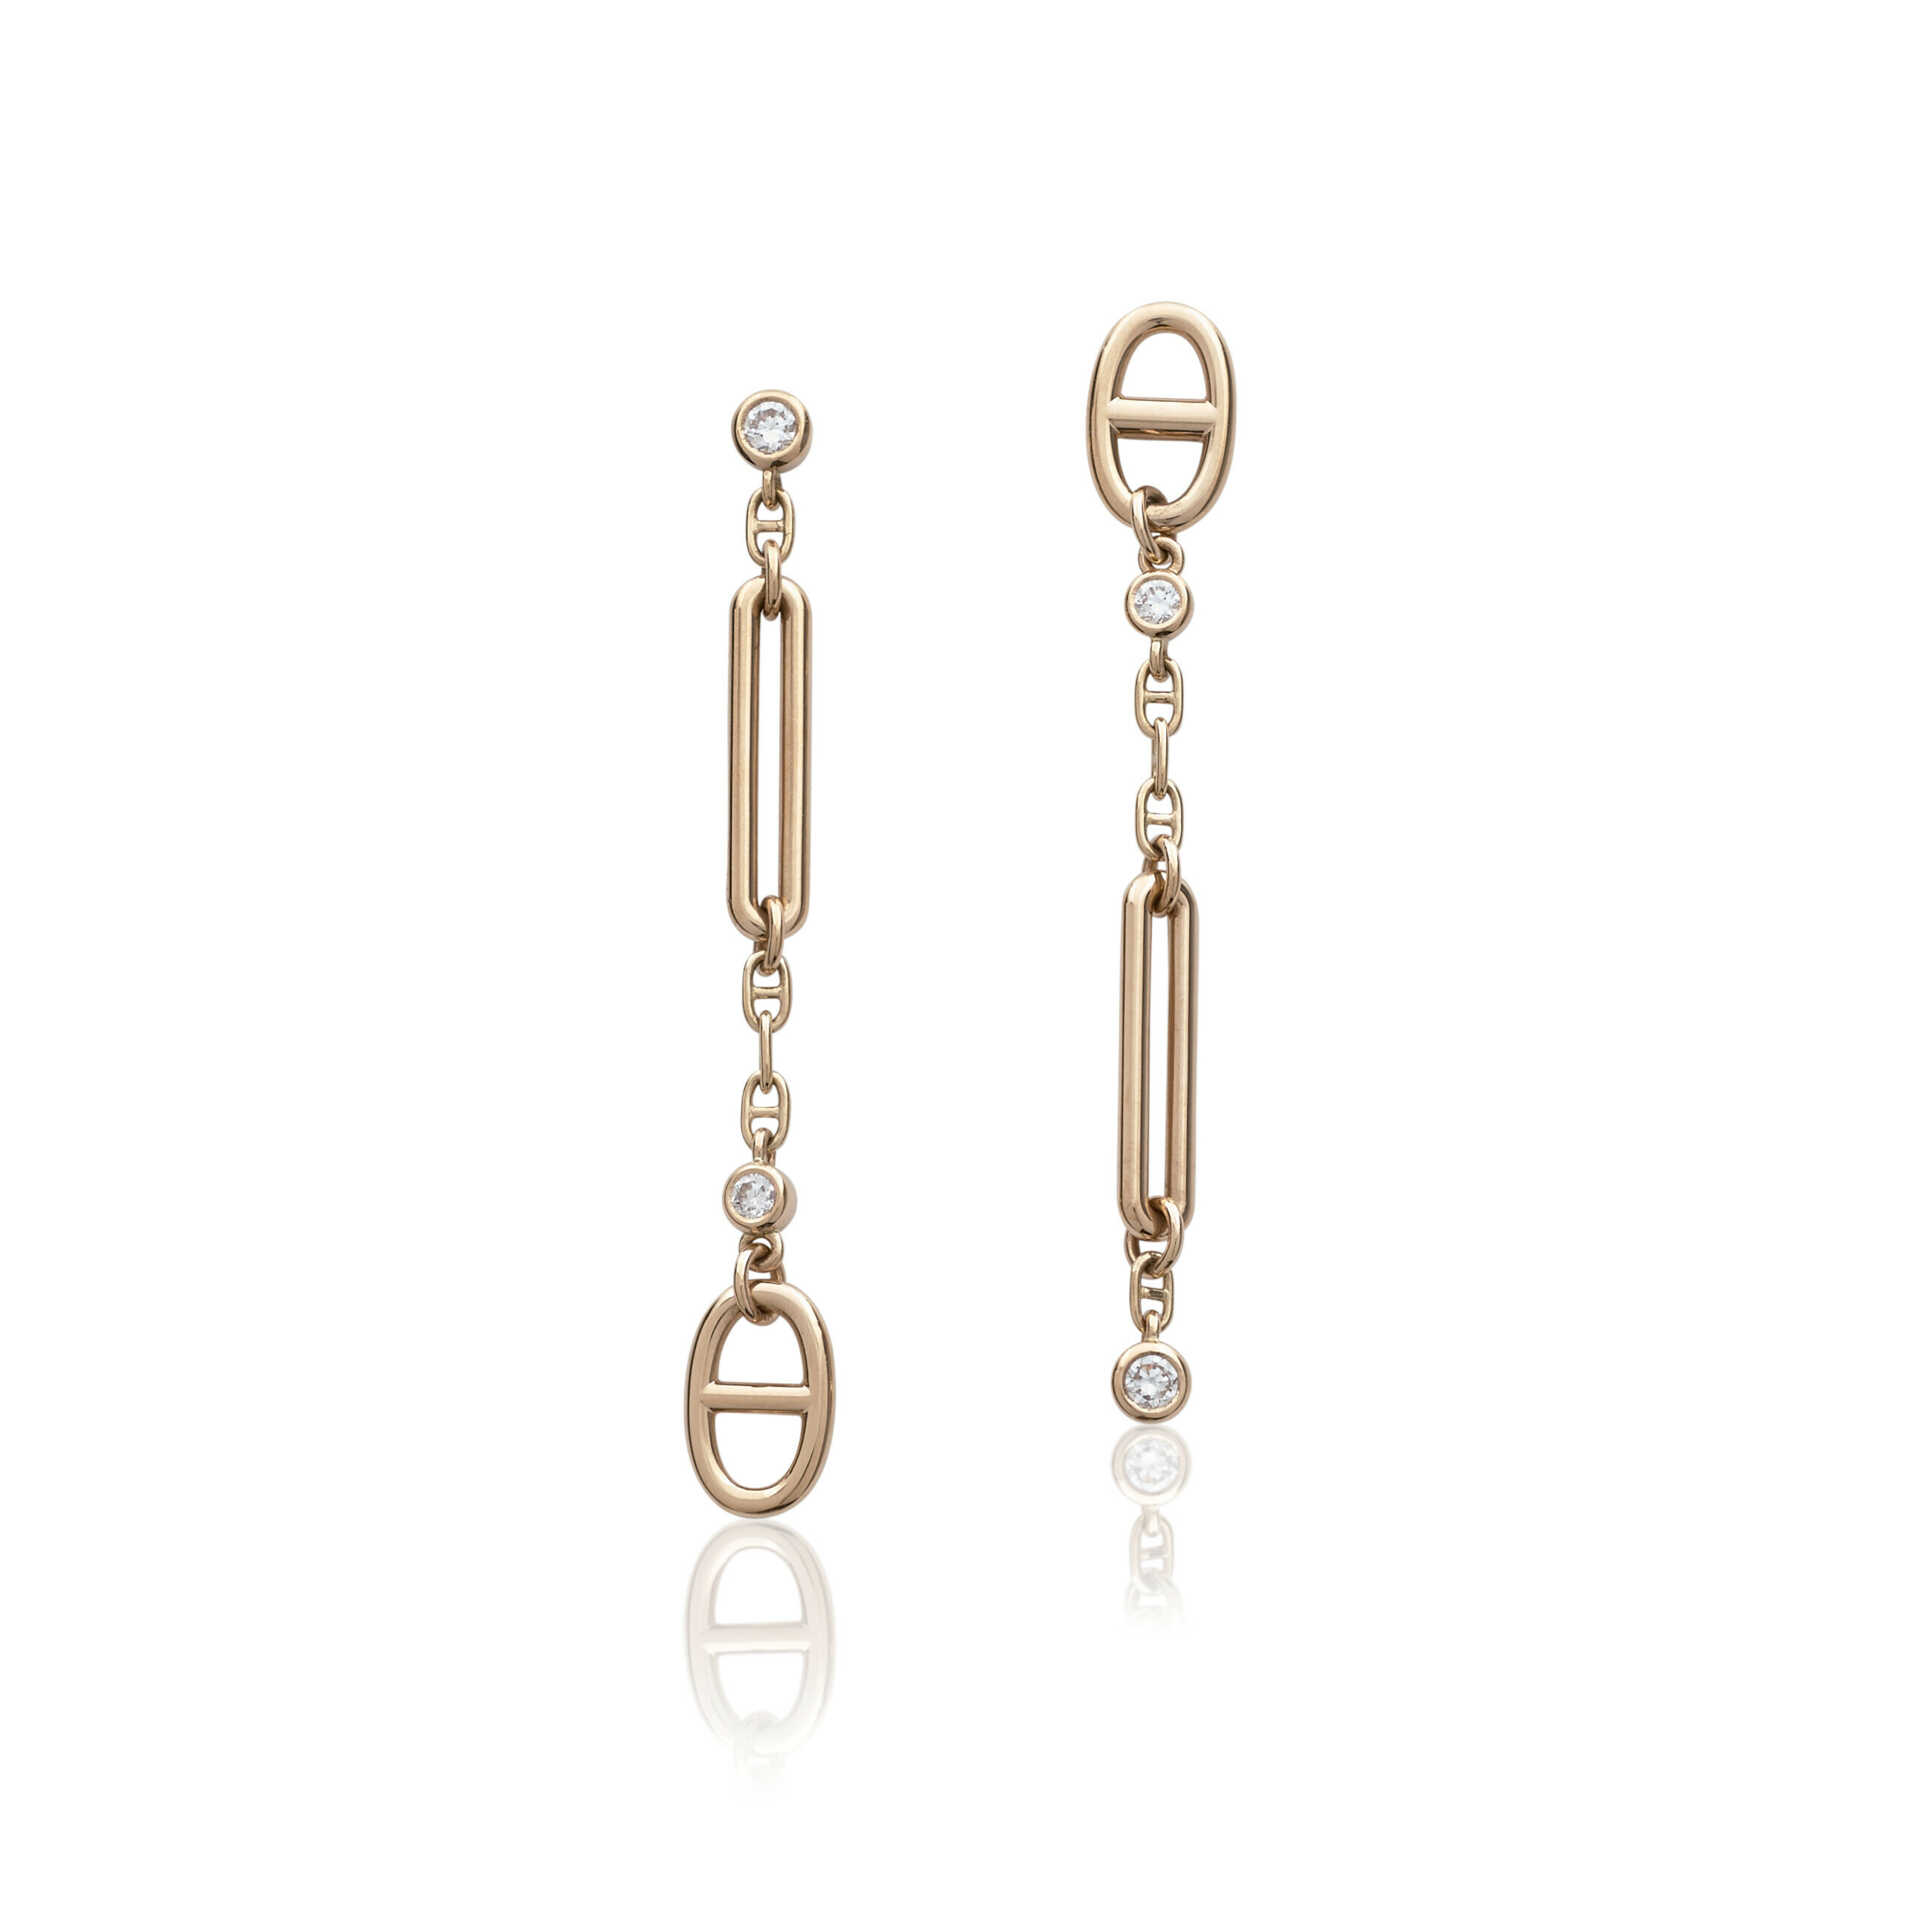 AN 18K ROSE GOLD & DIAMOND CHAINE D'ANCRE CHAOS EARRINGS